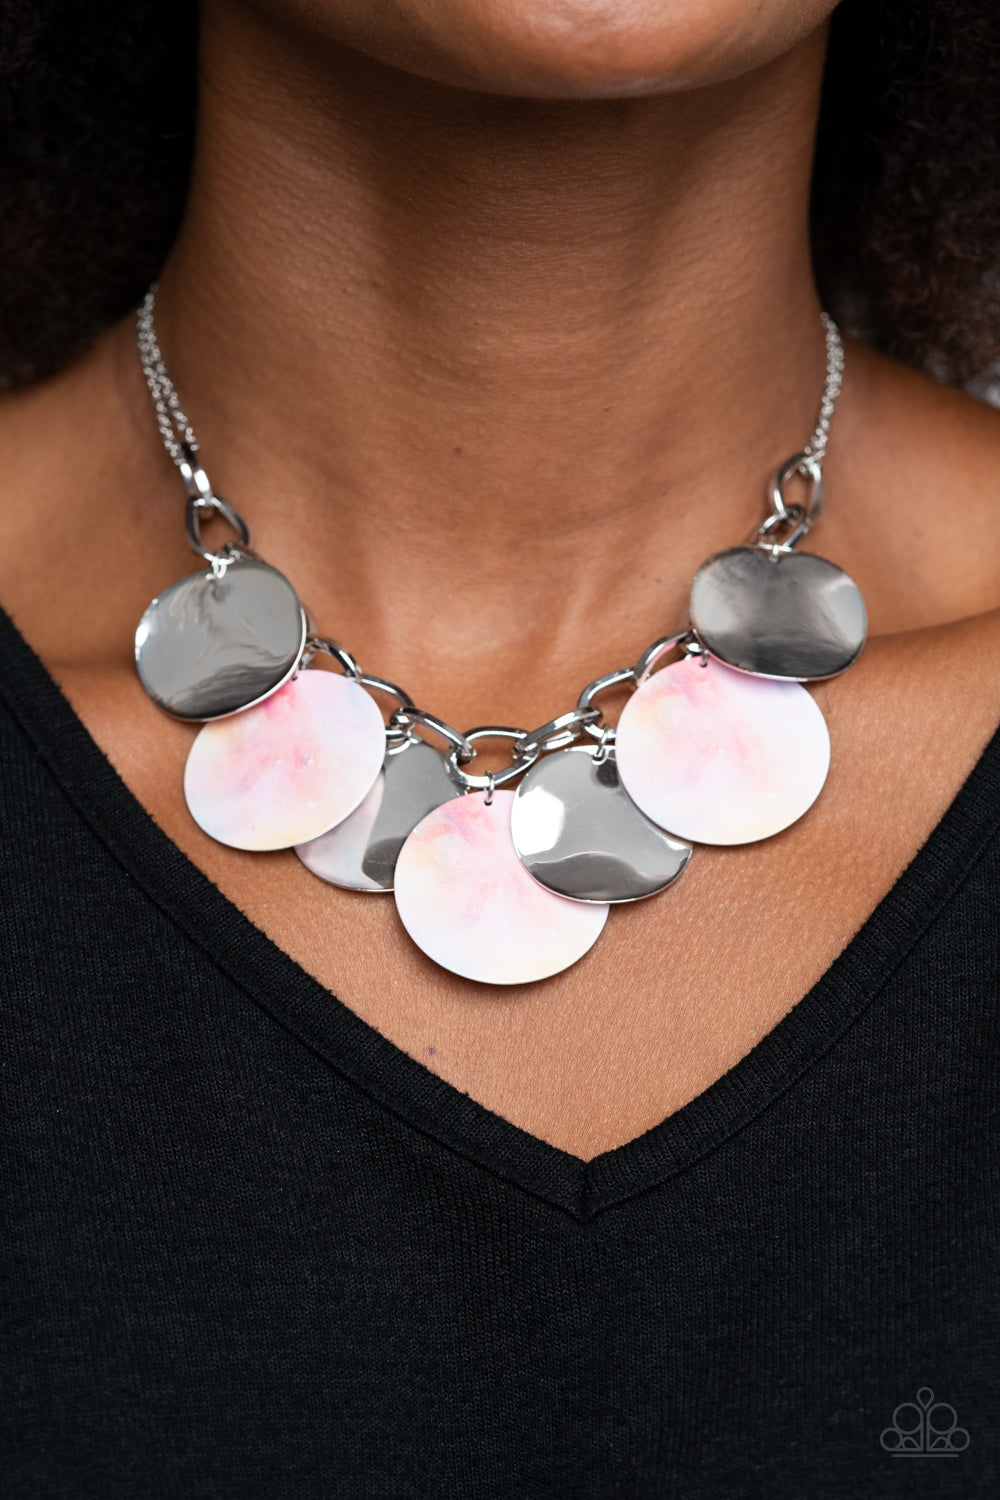 Tie Dye Drama Multi Necklace - Paparazzi Accessories. Featuring a galactic tie dye print, flat colorful discs swirled in tones of pink and yellow combine with curved silver discs, swinging from the bottom of a bulky silver chain for a trendy throwback look. Features an adjustable clasp closure.  All Paparazzi Accessories are lead free and nickel free!  Sold as one individual necklace. Includes one pair of matching earrings.  Get The Complete Look! Bracelet: "Teasingly Tie Die - Multi" (Sold Separately)